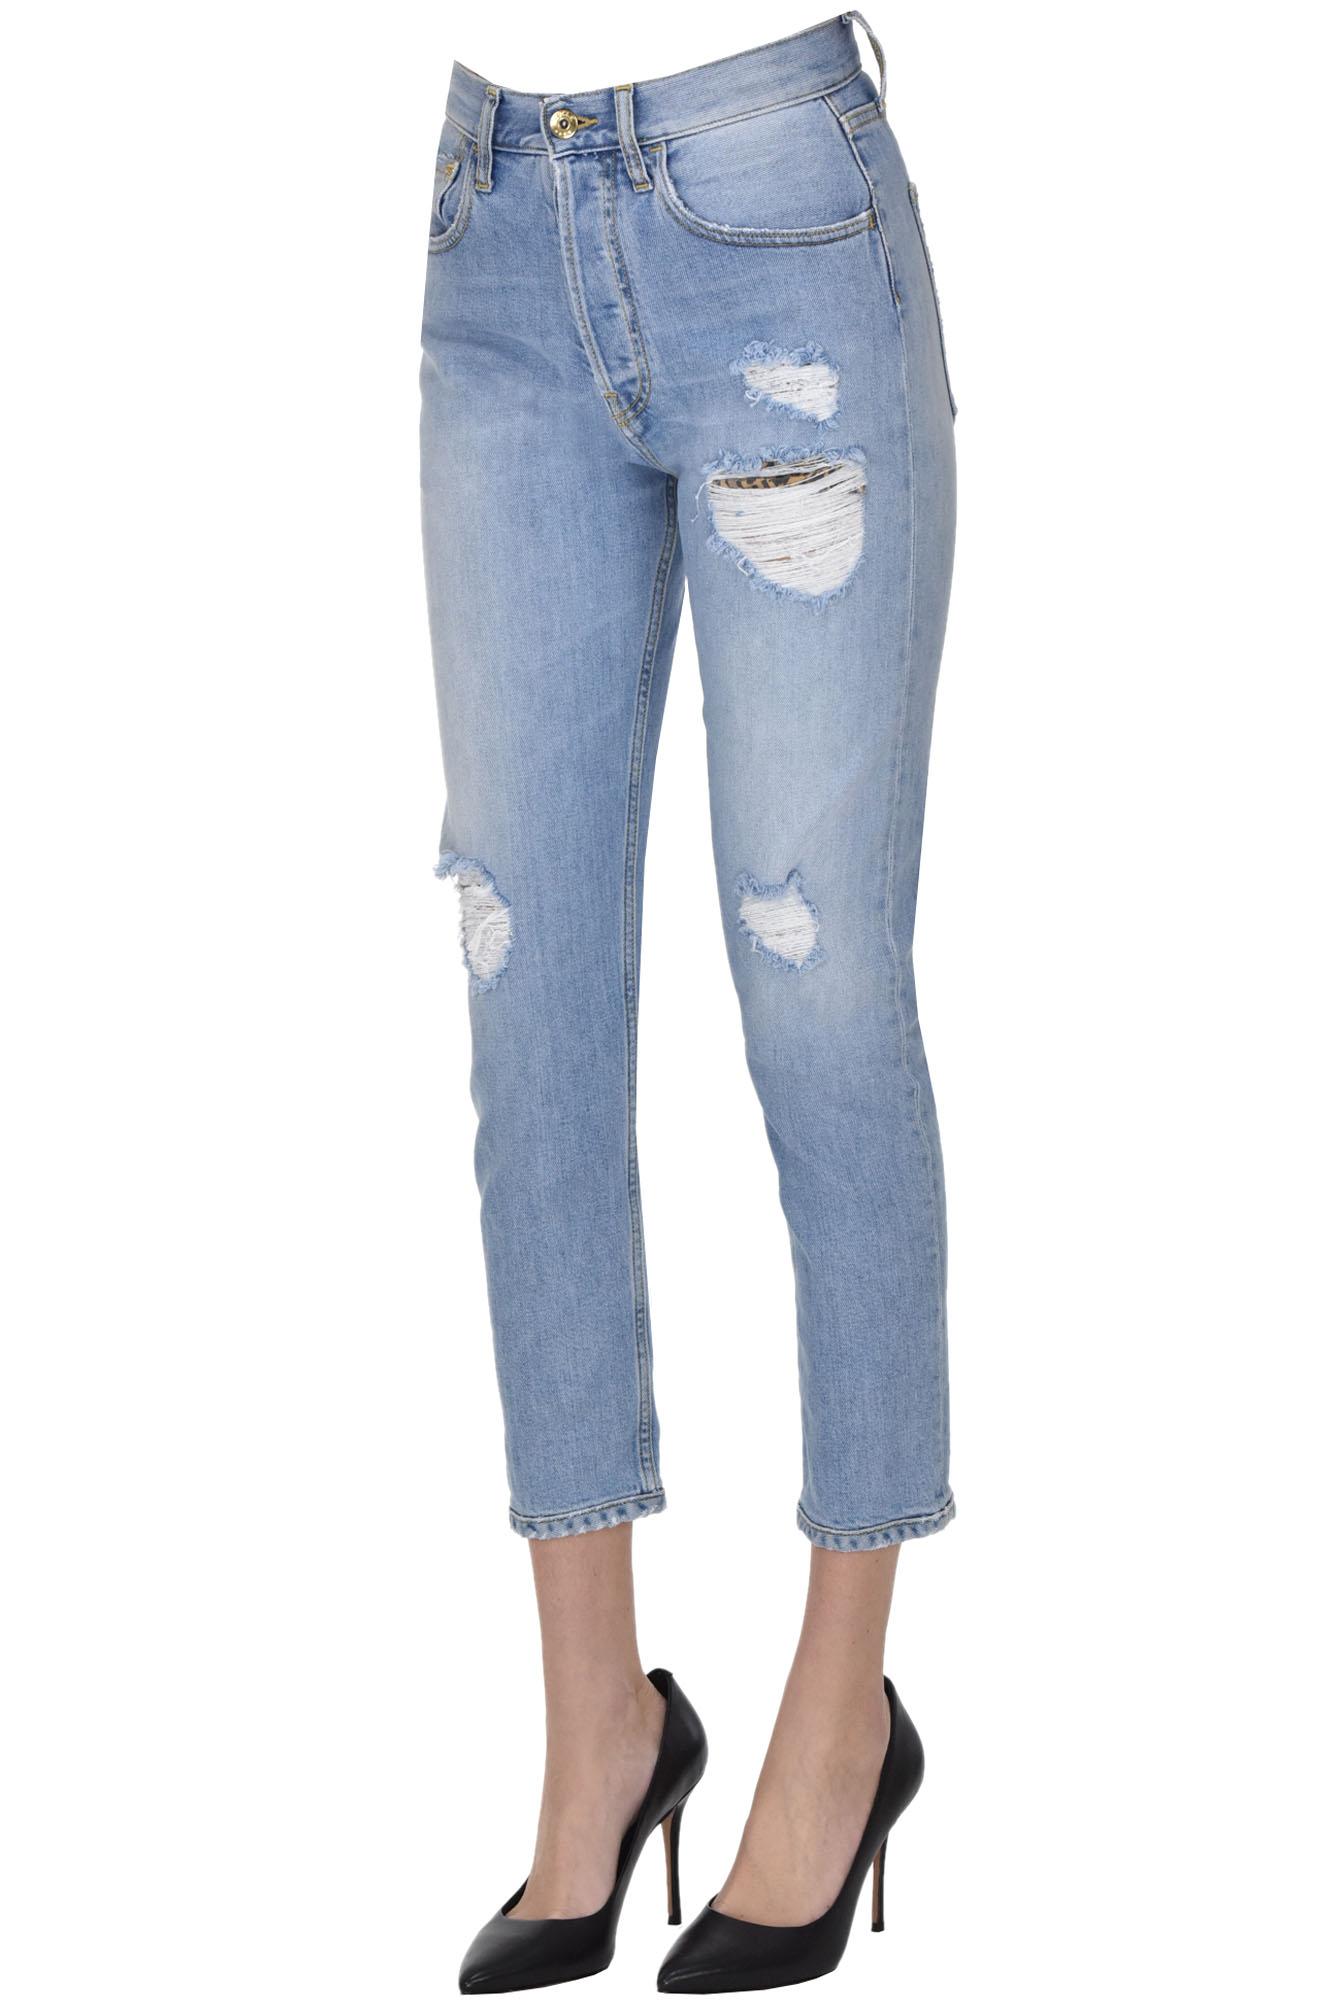 CYCLE Denim Cropped Destroyed Jeans in Light Denim (Blue) - Lyst